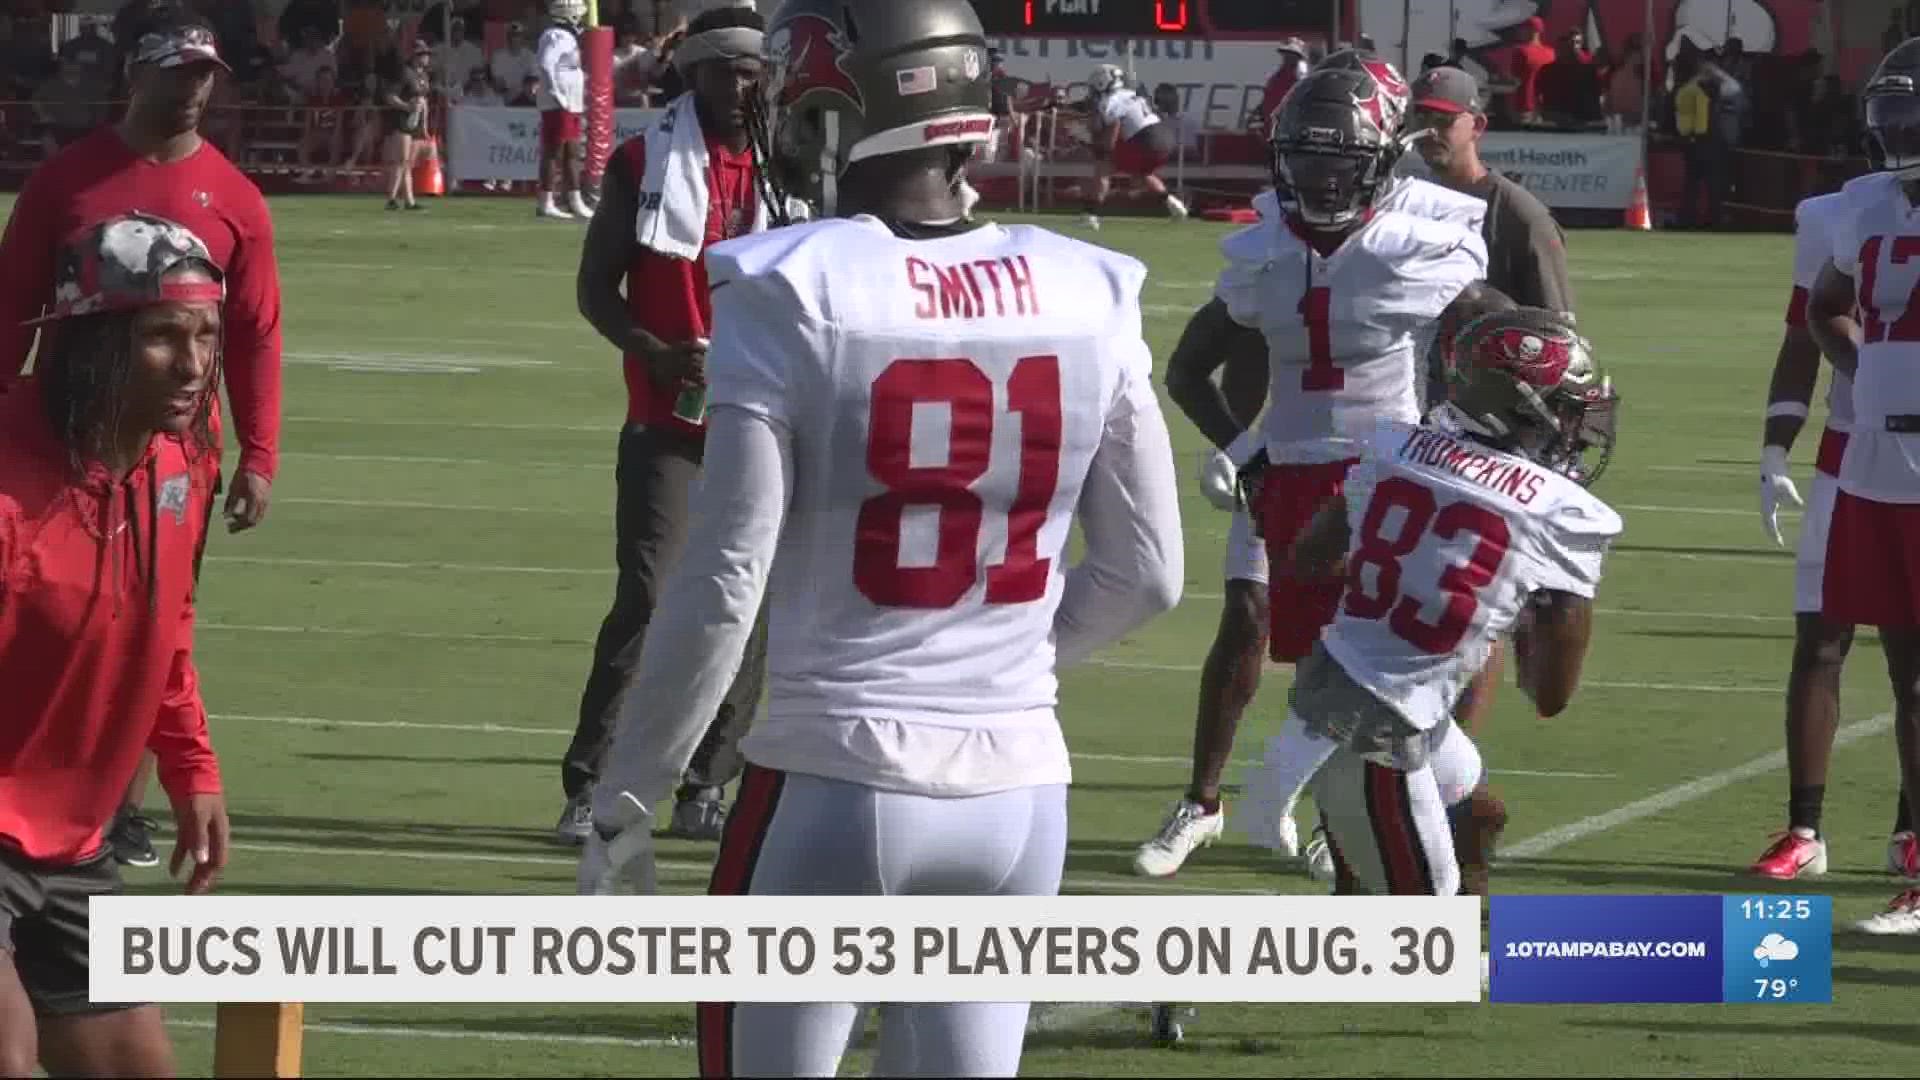 The Buccaneers play their final preseason game on Saturday, taking on the Indianapolis Colts. For the younger players, this is their final chance to make the roster.